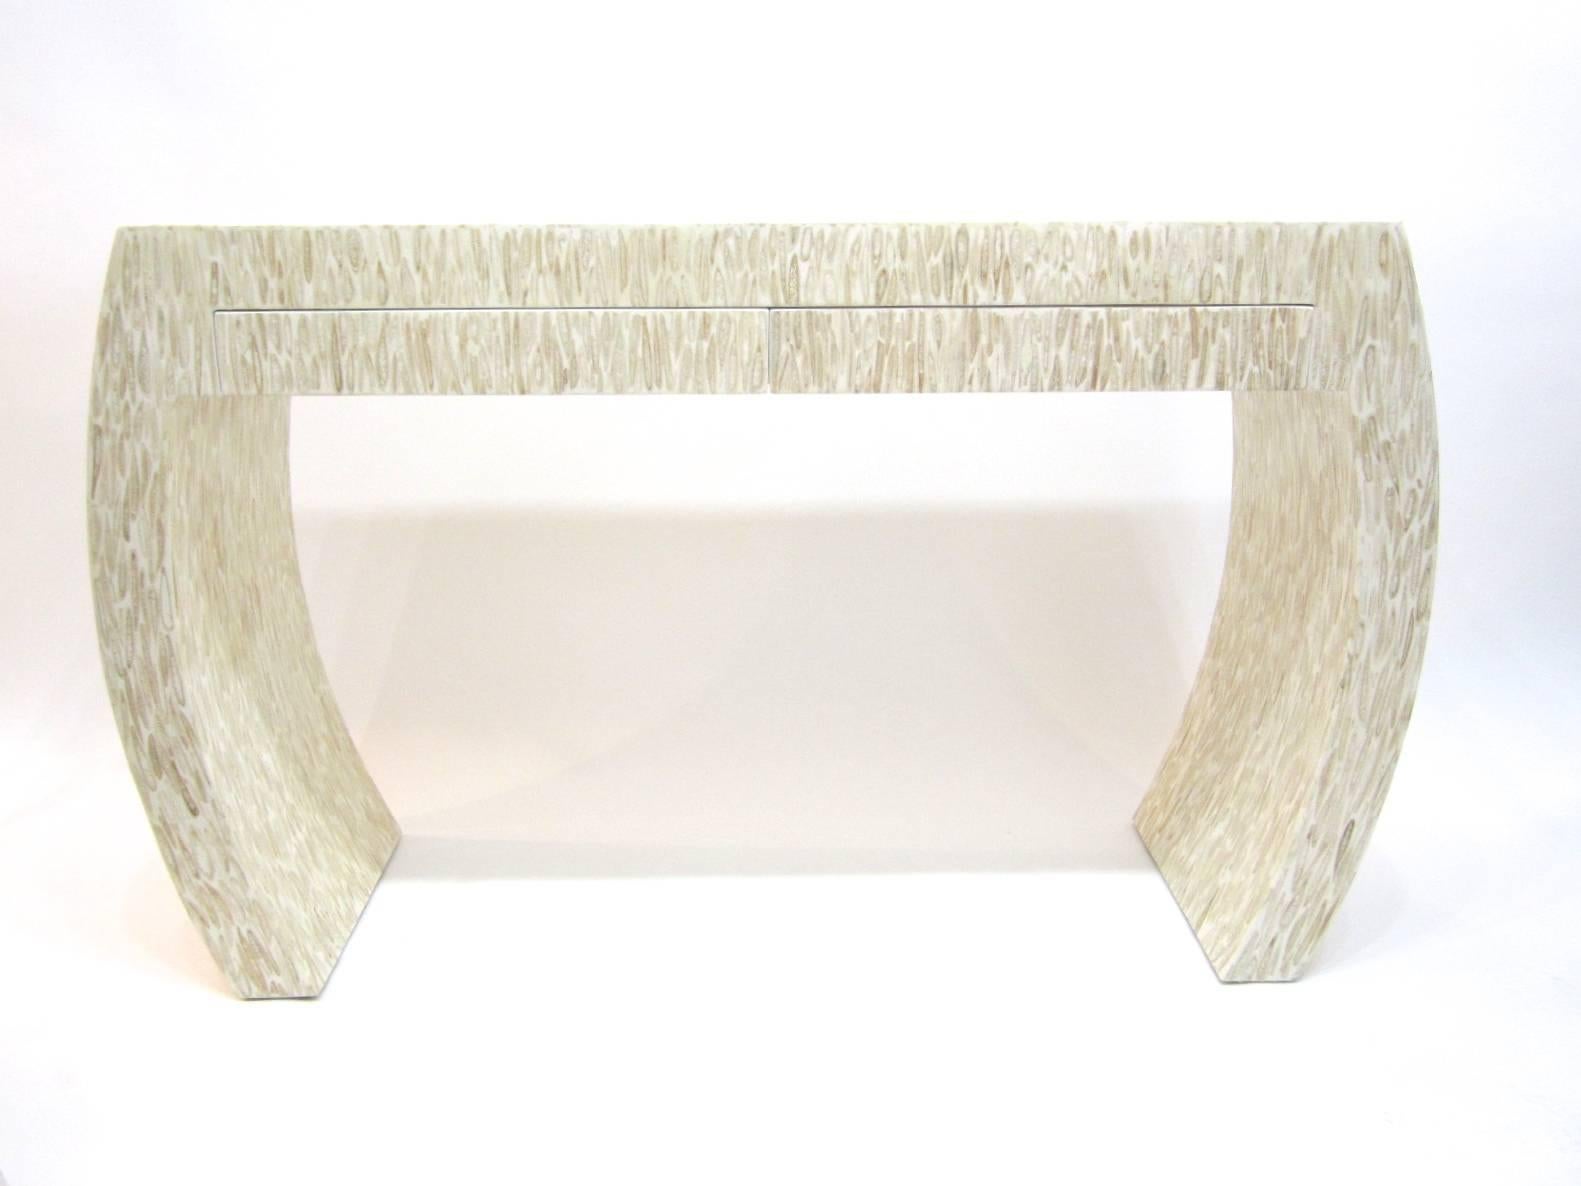 Fantastic console table and writing table made of sliced antler applied on wood and clear coat lacquered. Two side by side drawers finished inside in white lacquer. Mint pristine condition, perfect for entrance way and as writing desk.